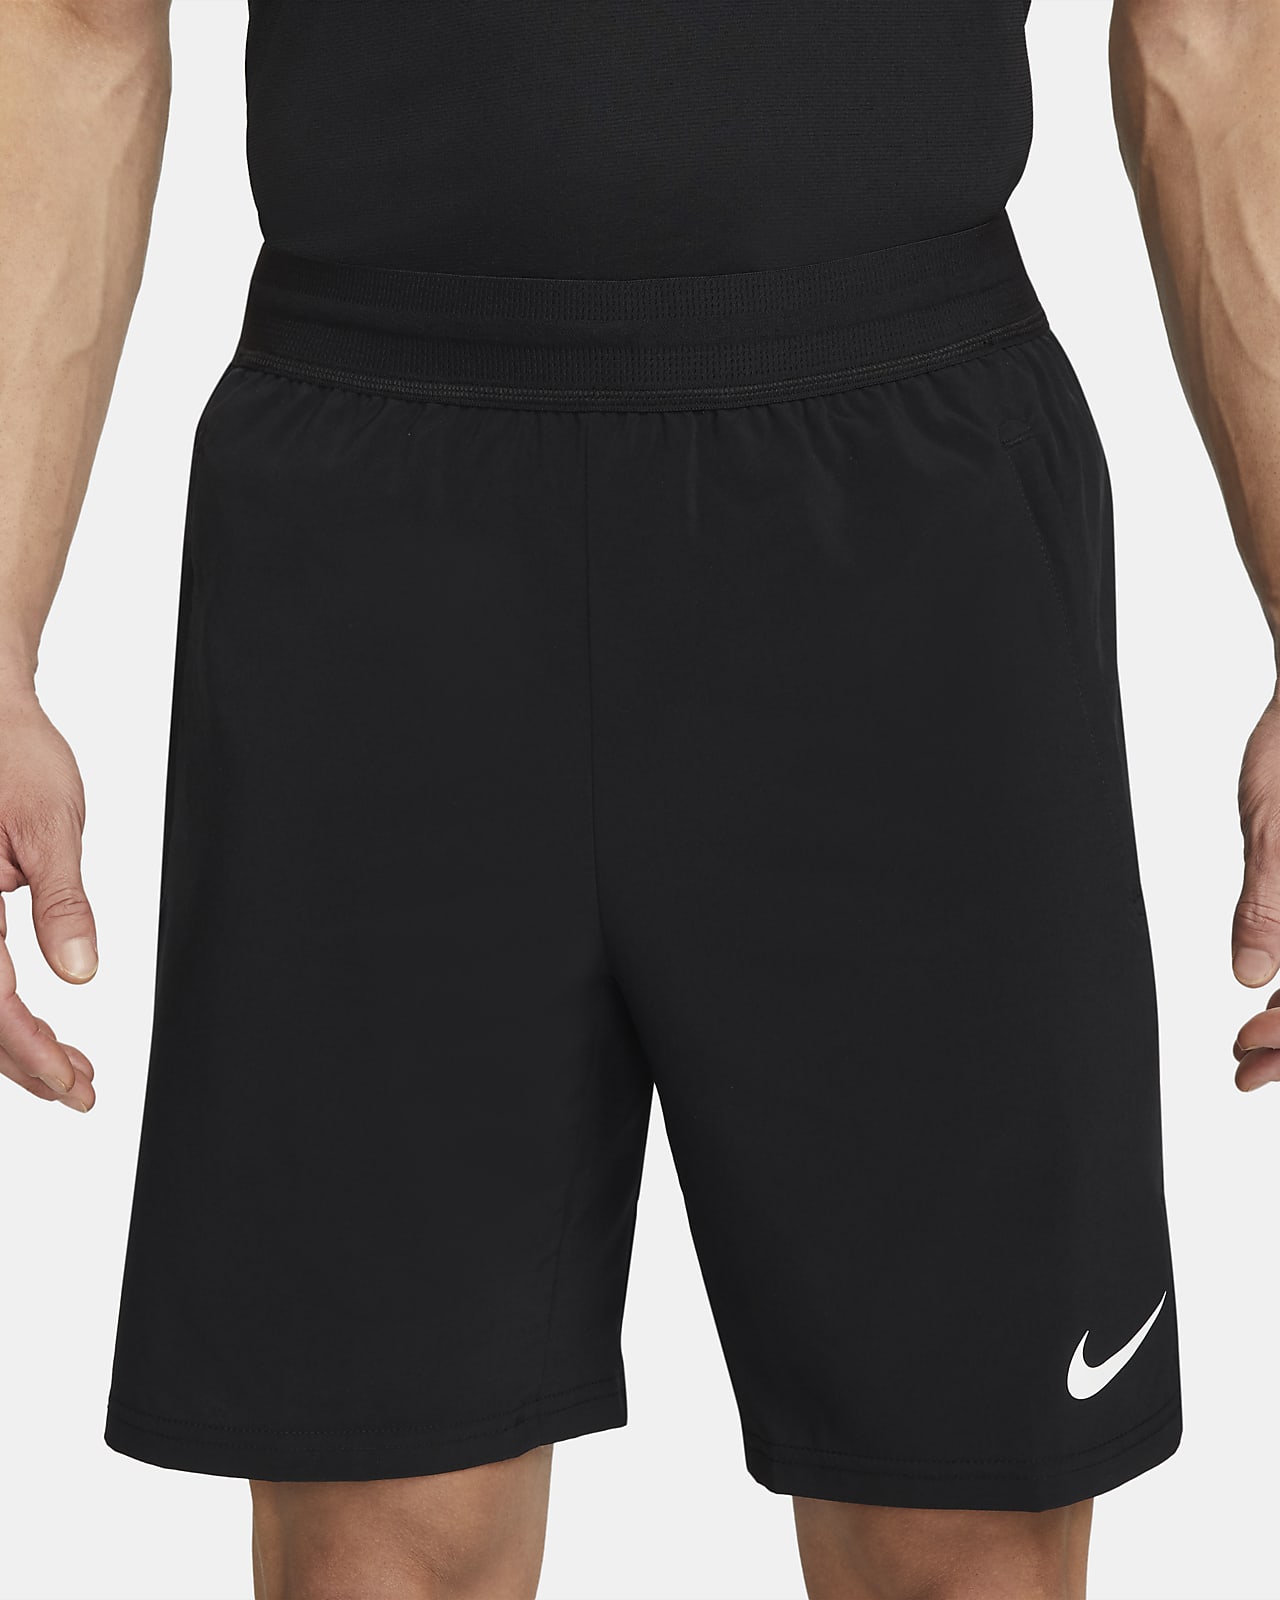 Men's Volleyball Shorts. Nike CA